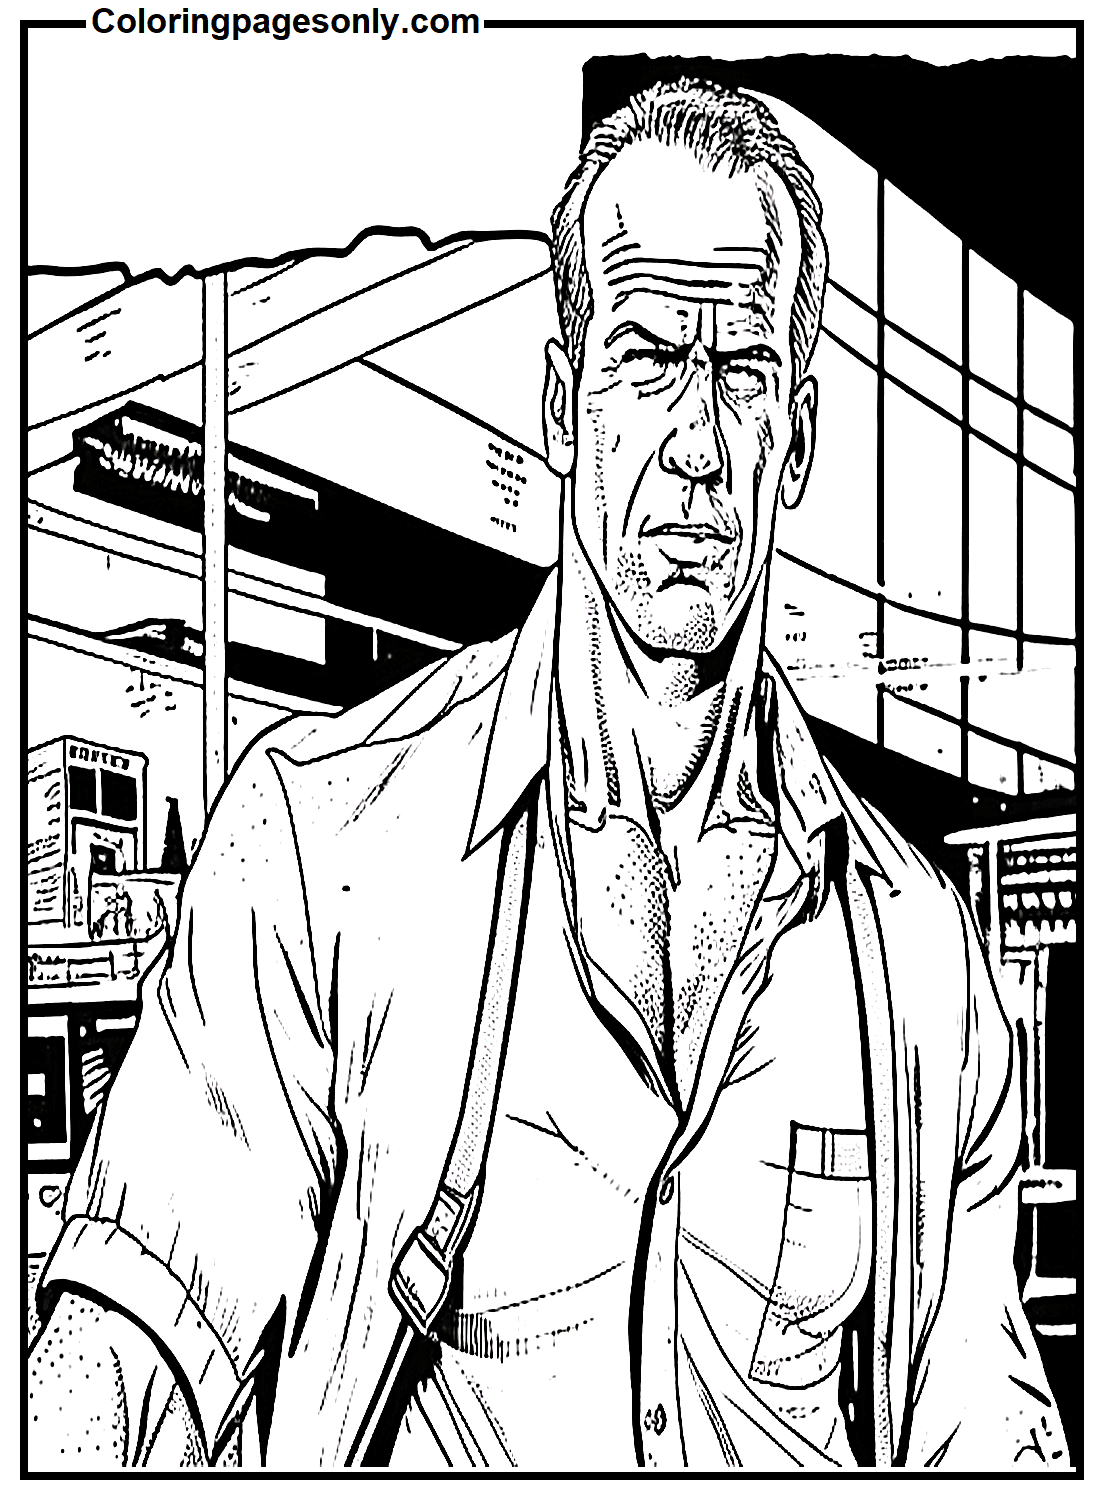 Bruce Willis As John McClane Image Coloring Pages